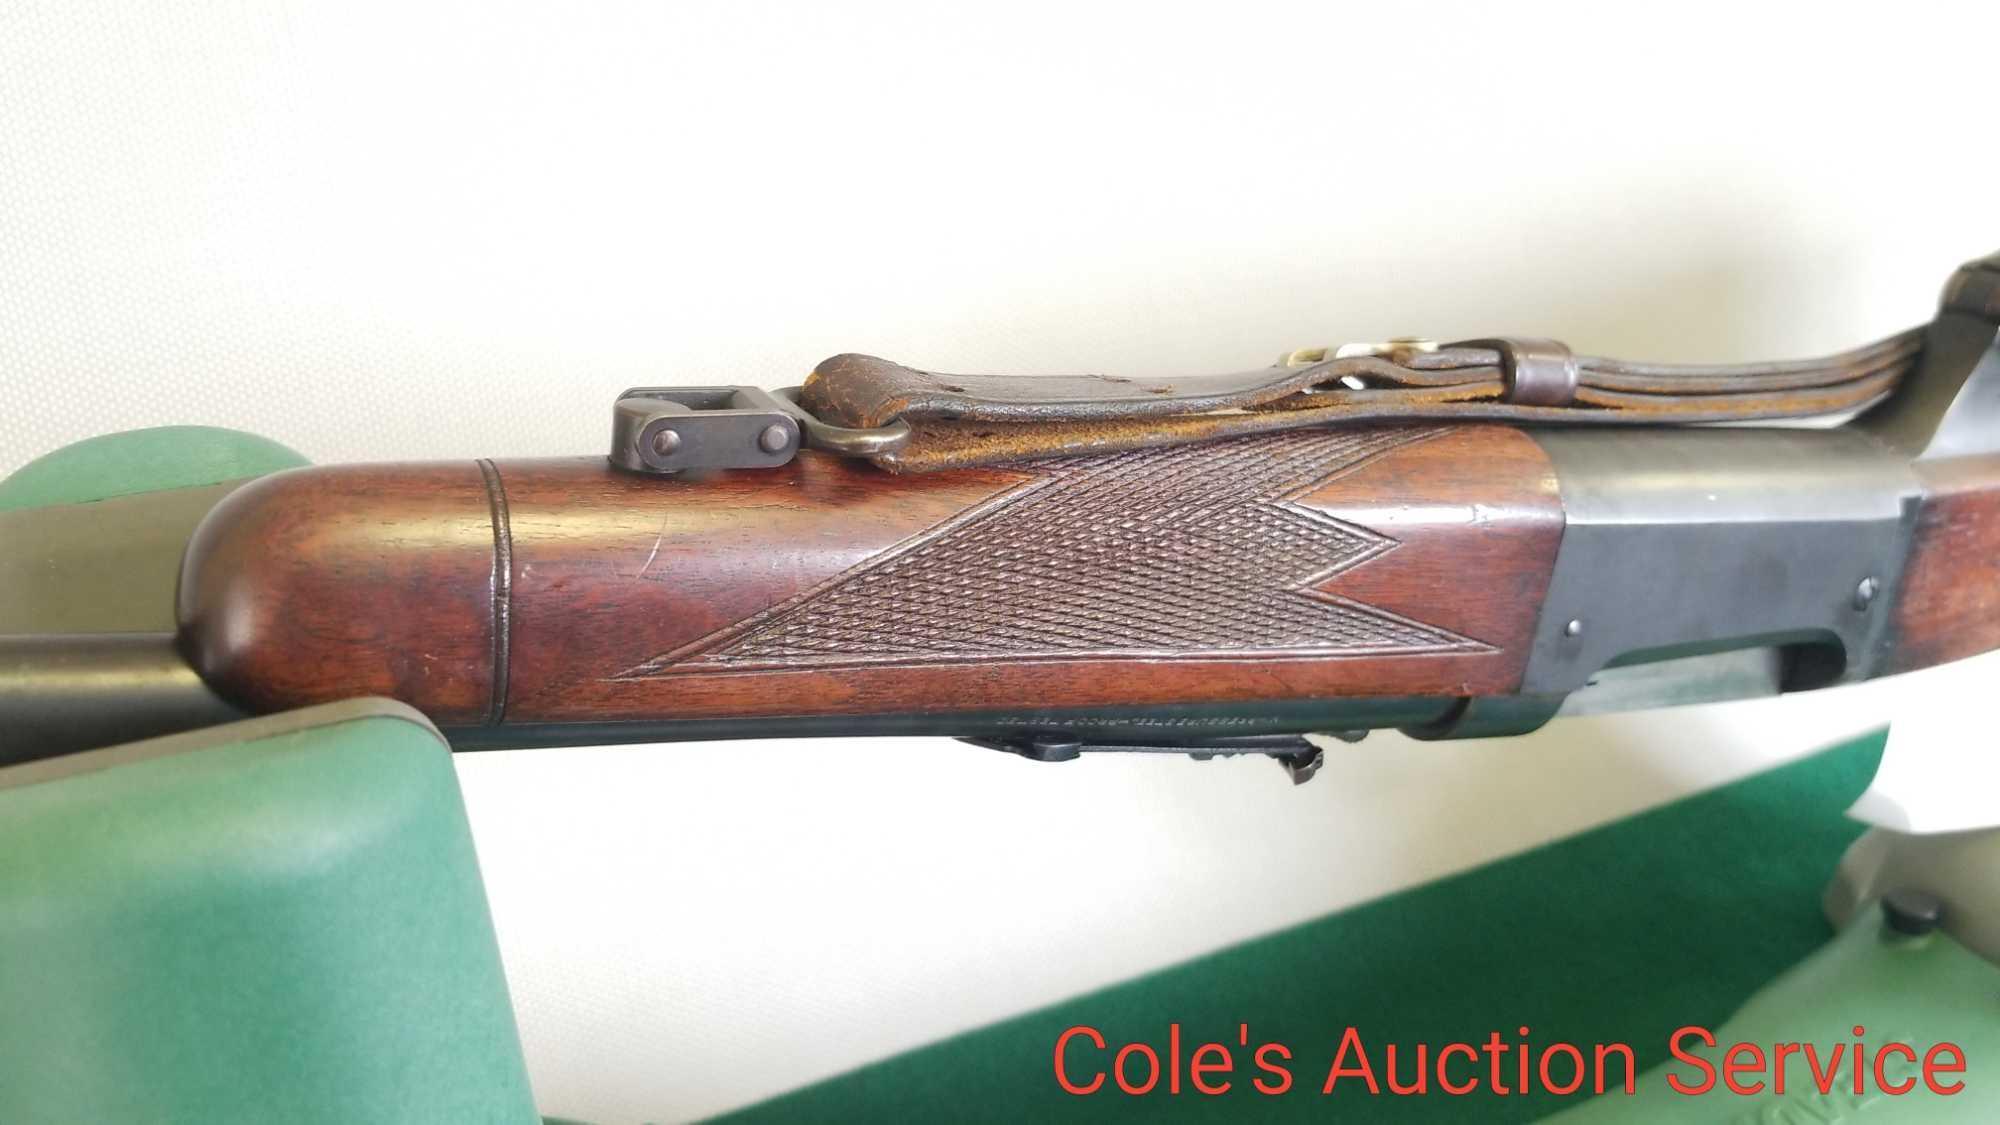 Savage Model 99RS .300 caliber rifle in great condition. Serial number 352940, manufactured in 1936.